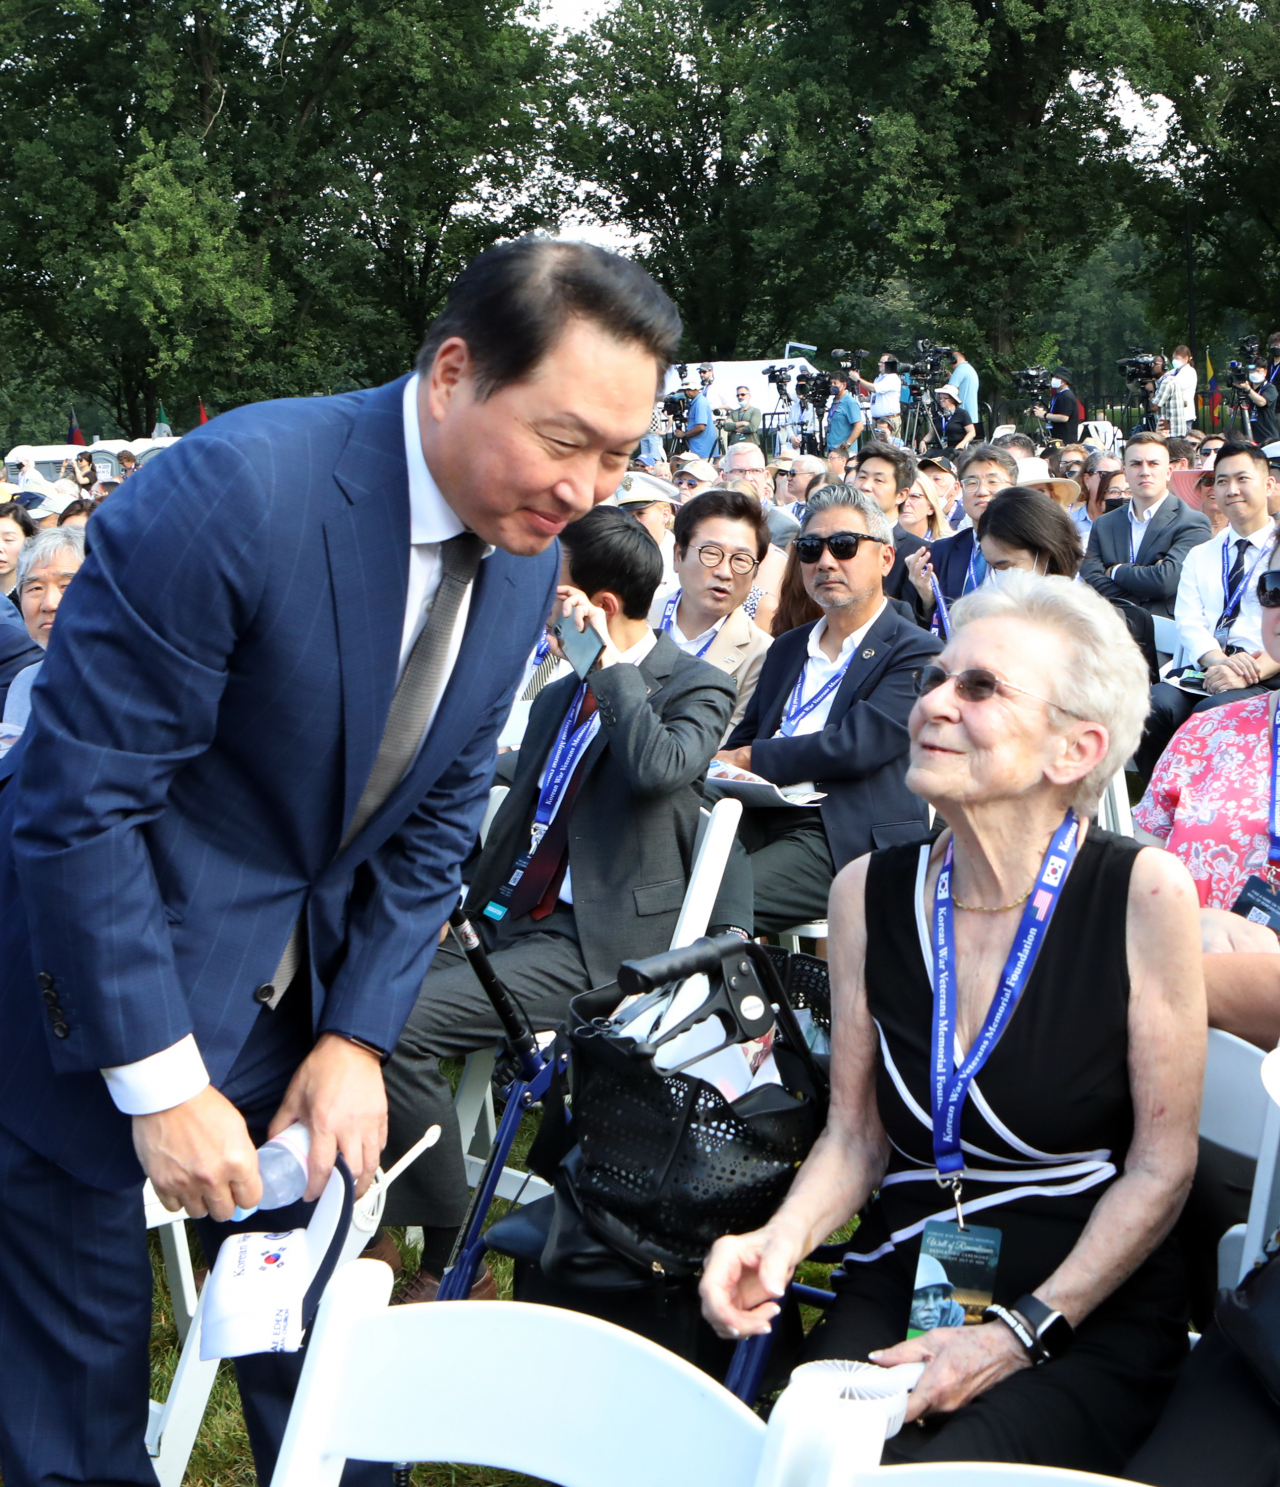 SK Group Chairman Chey Tae-won (left) meets Annelie Weber, the widow of the late US Army Col. William E. Weber, during a ceremony celebrating the completion of the Wall of Remembrance at the Korean War Veterans Memorial in Washington DC, in July 2022. (SK Group)